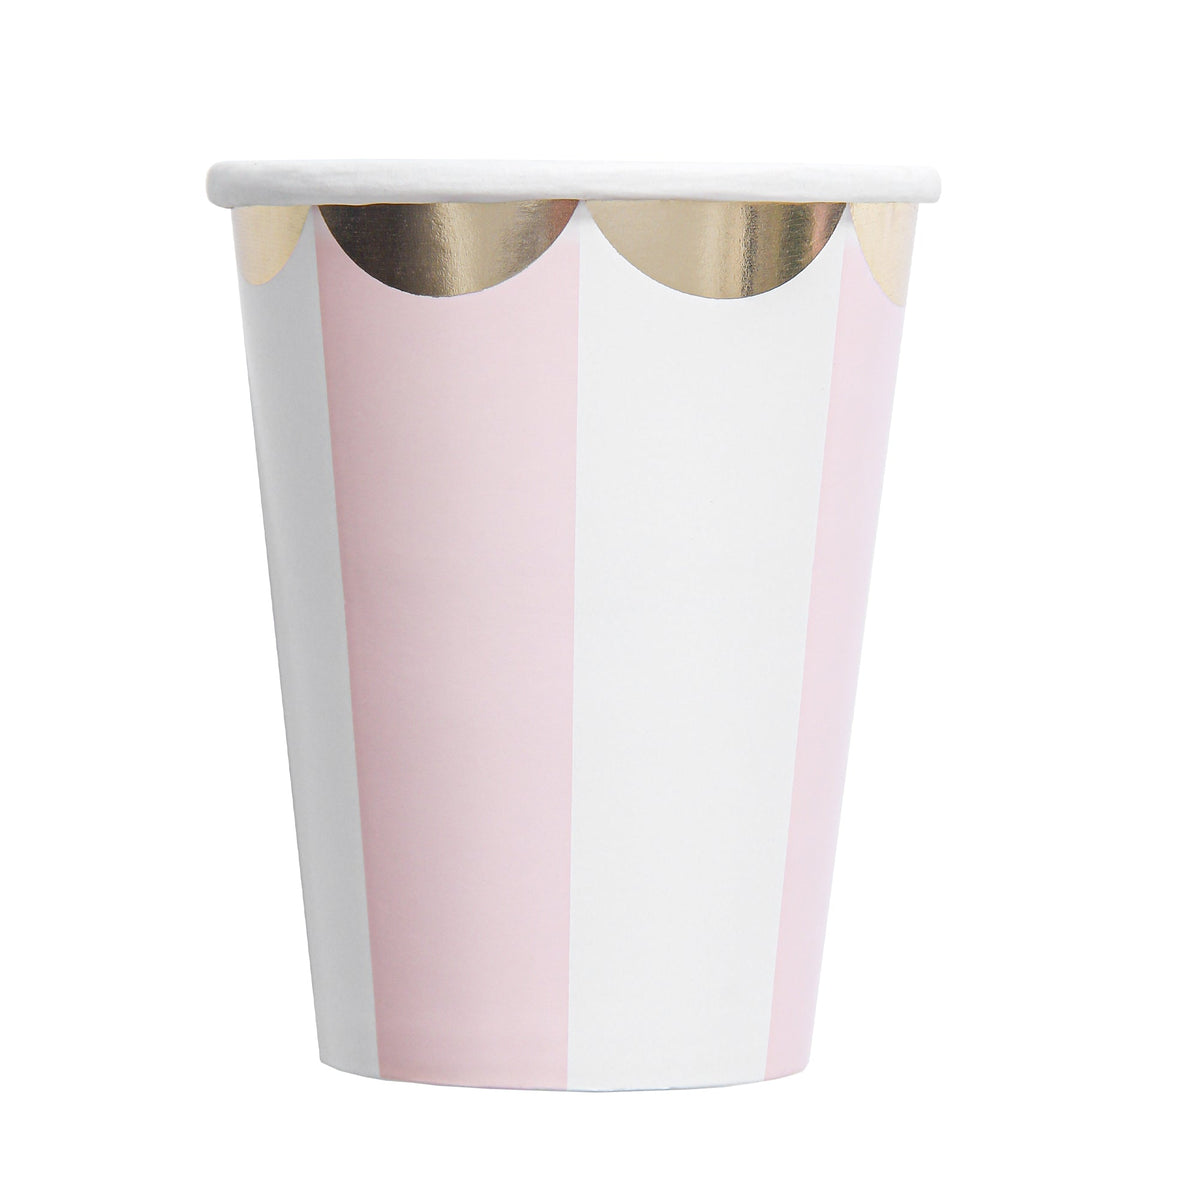 YIWU SANDY PAPER PRODUCTS CO., LTD Everyday Entertaining Candy Land Paper Cups, Light Pink, 9 oz, 8 Count 810120712673